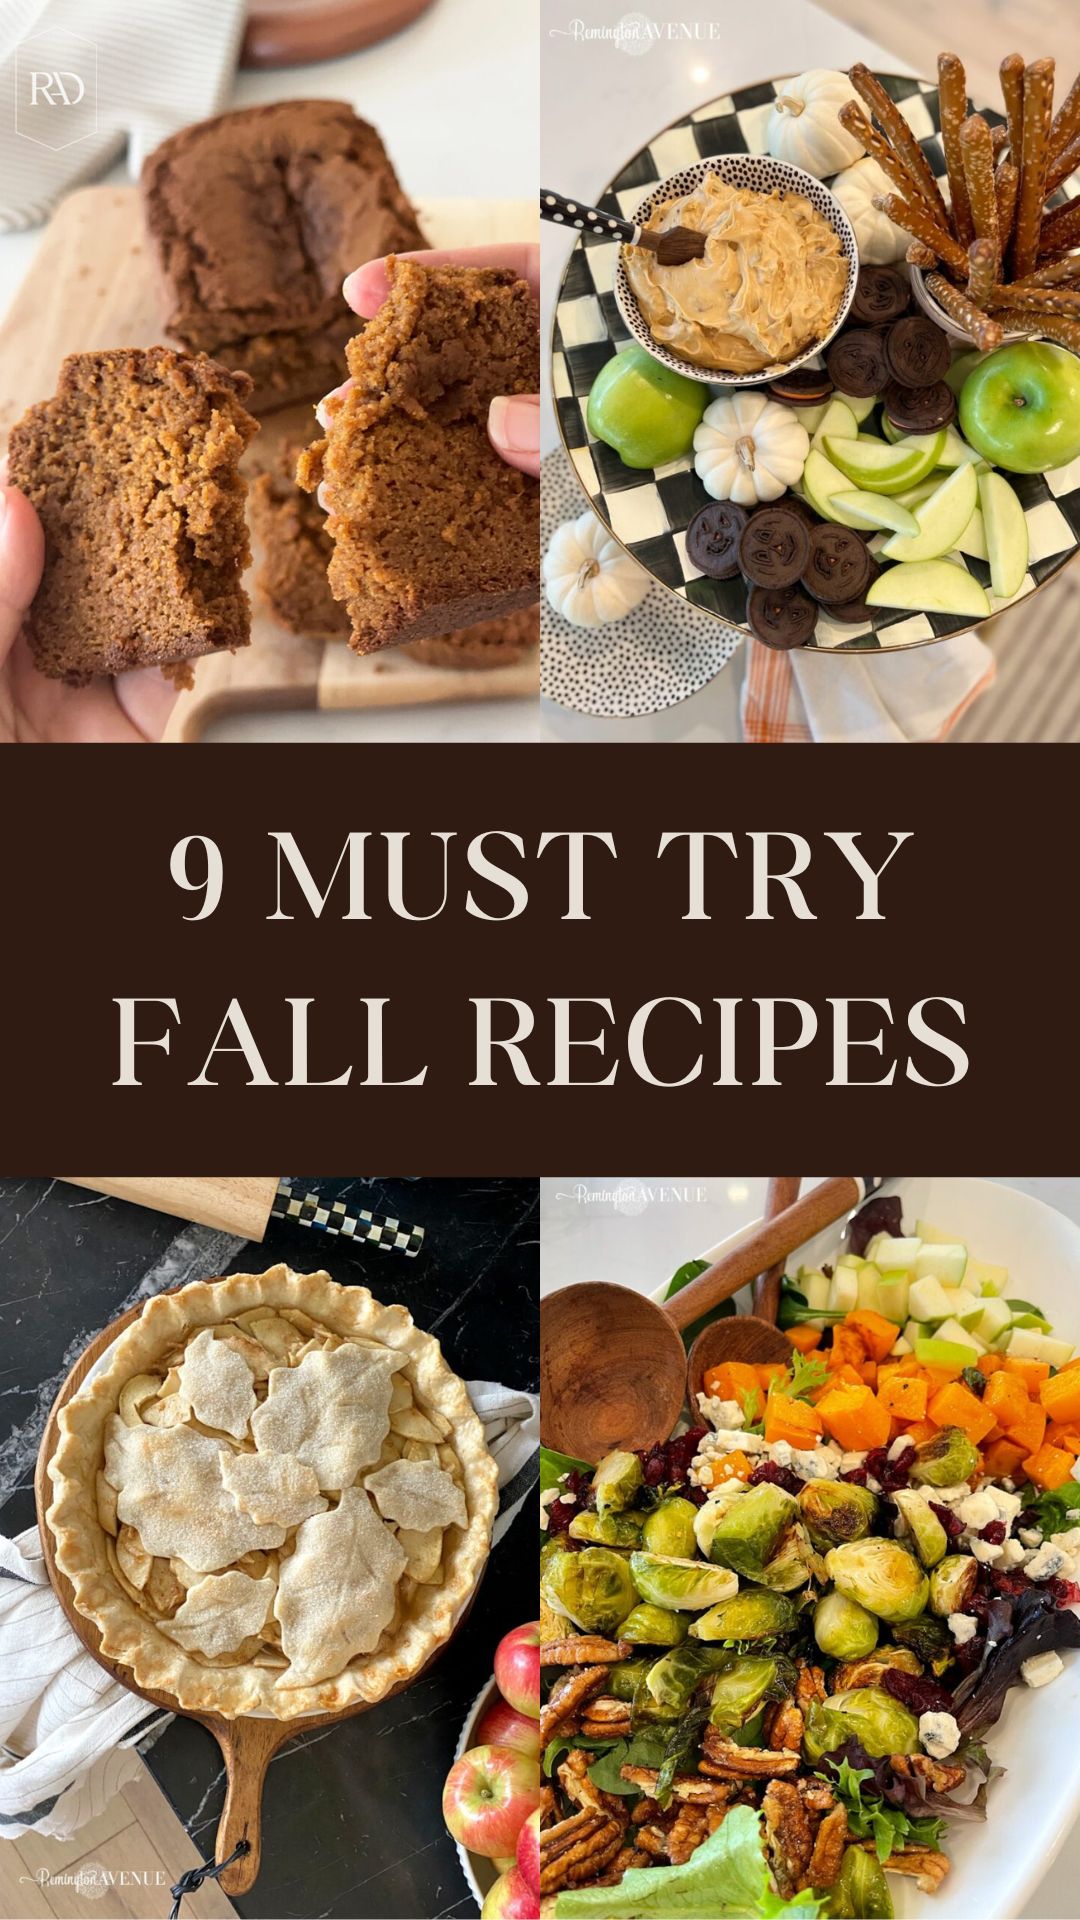 9 Must Try Fall Recipes - Remington Avenue